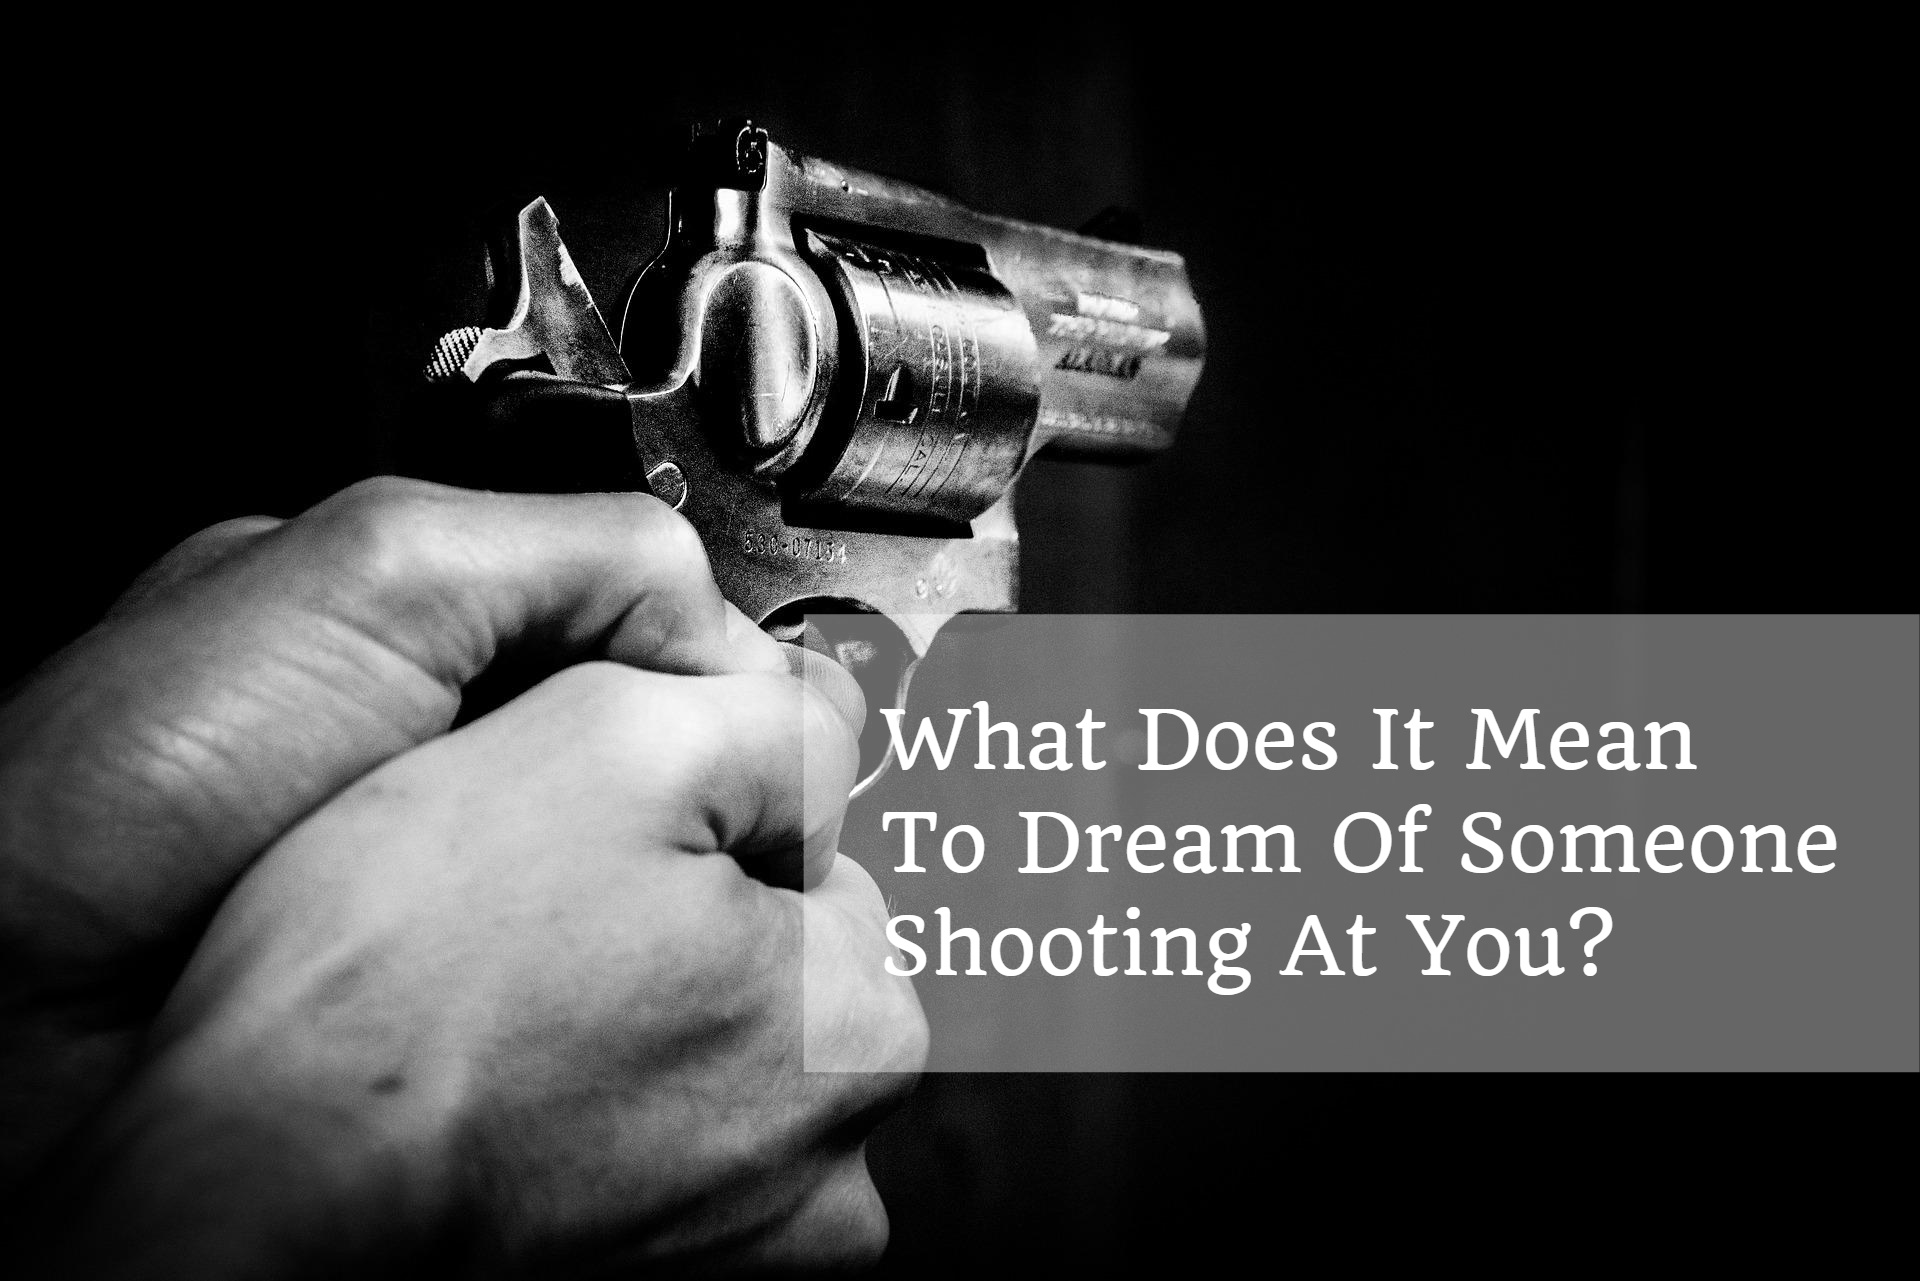 What Does It Mean To Dream Of Someone Shooting At You?